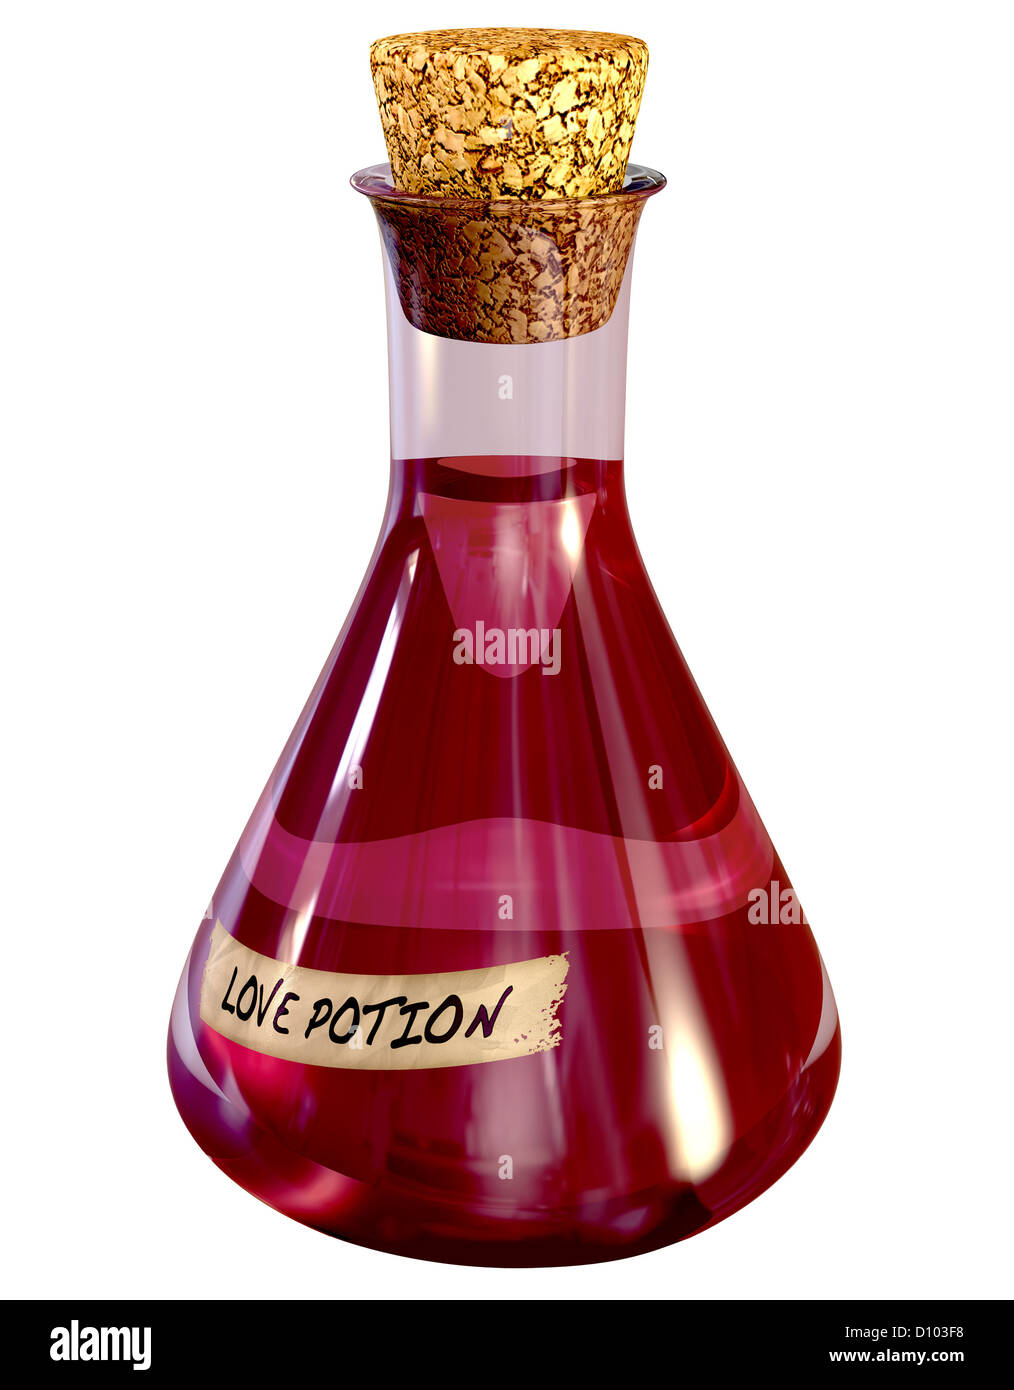 A regular chemistry glass bottle filled with a pink liquid called love potion and sealed with a cork on an isolated background Stock Photo